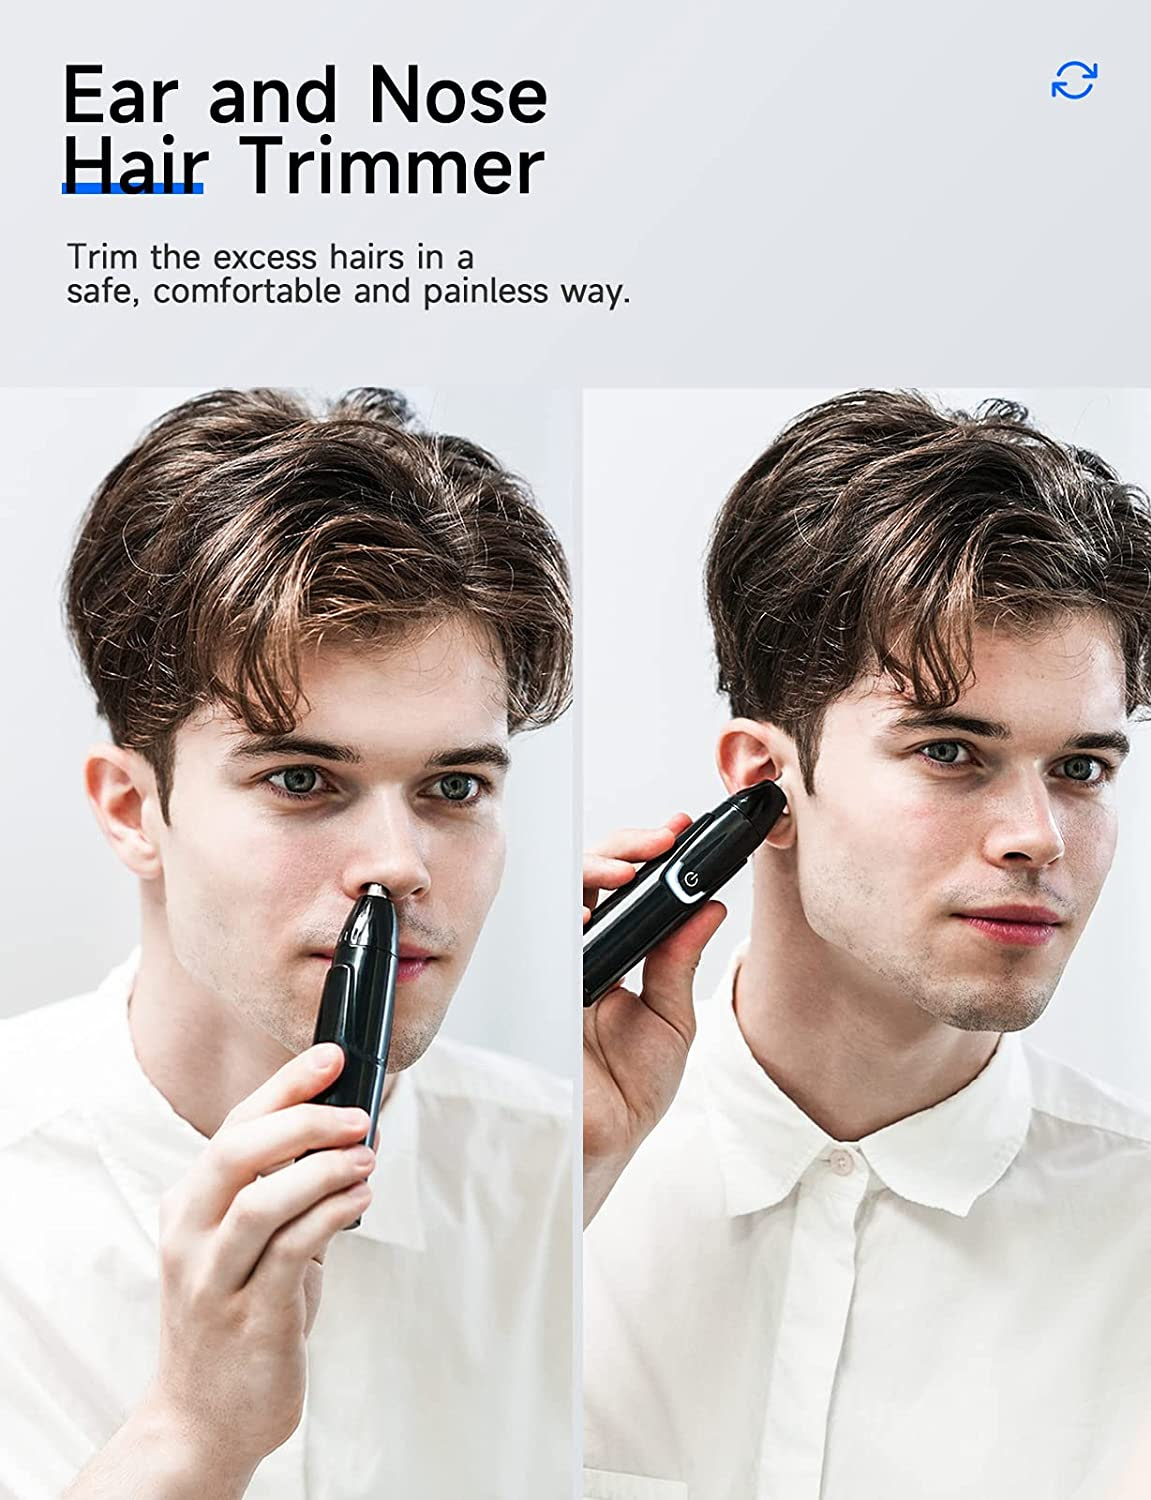 Rechargeable Ear and Nose Hair Trimmer.